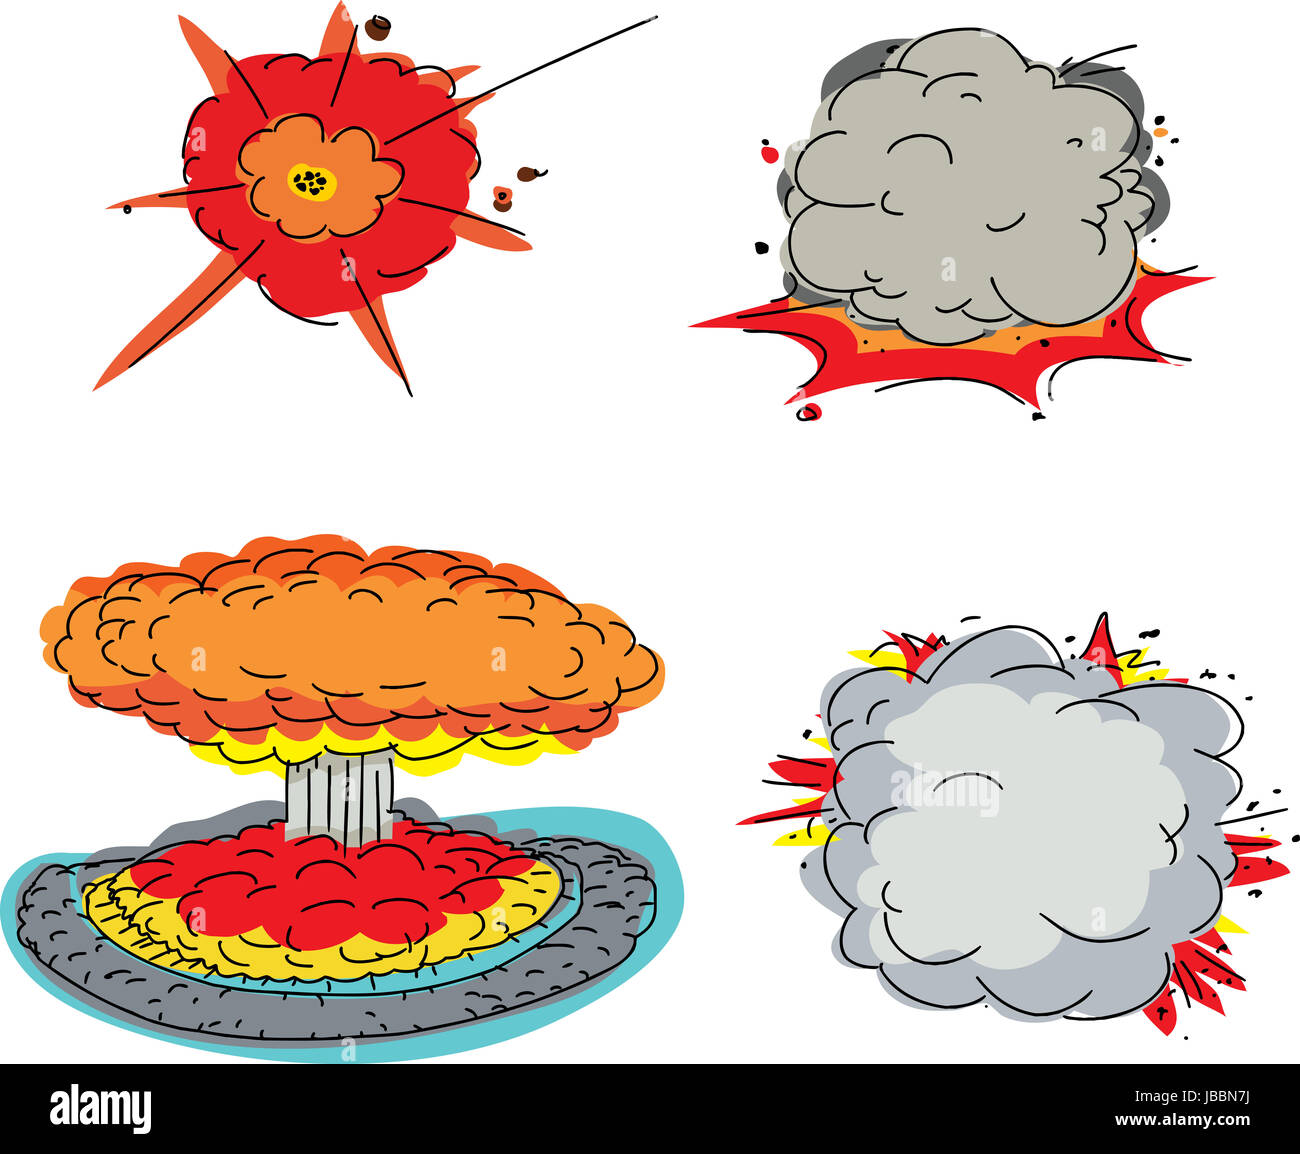 Set of four cartoon explosions over white background Stock Photo